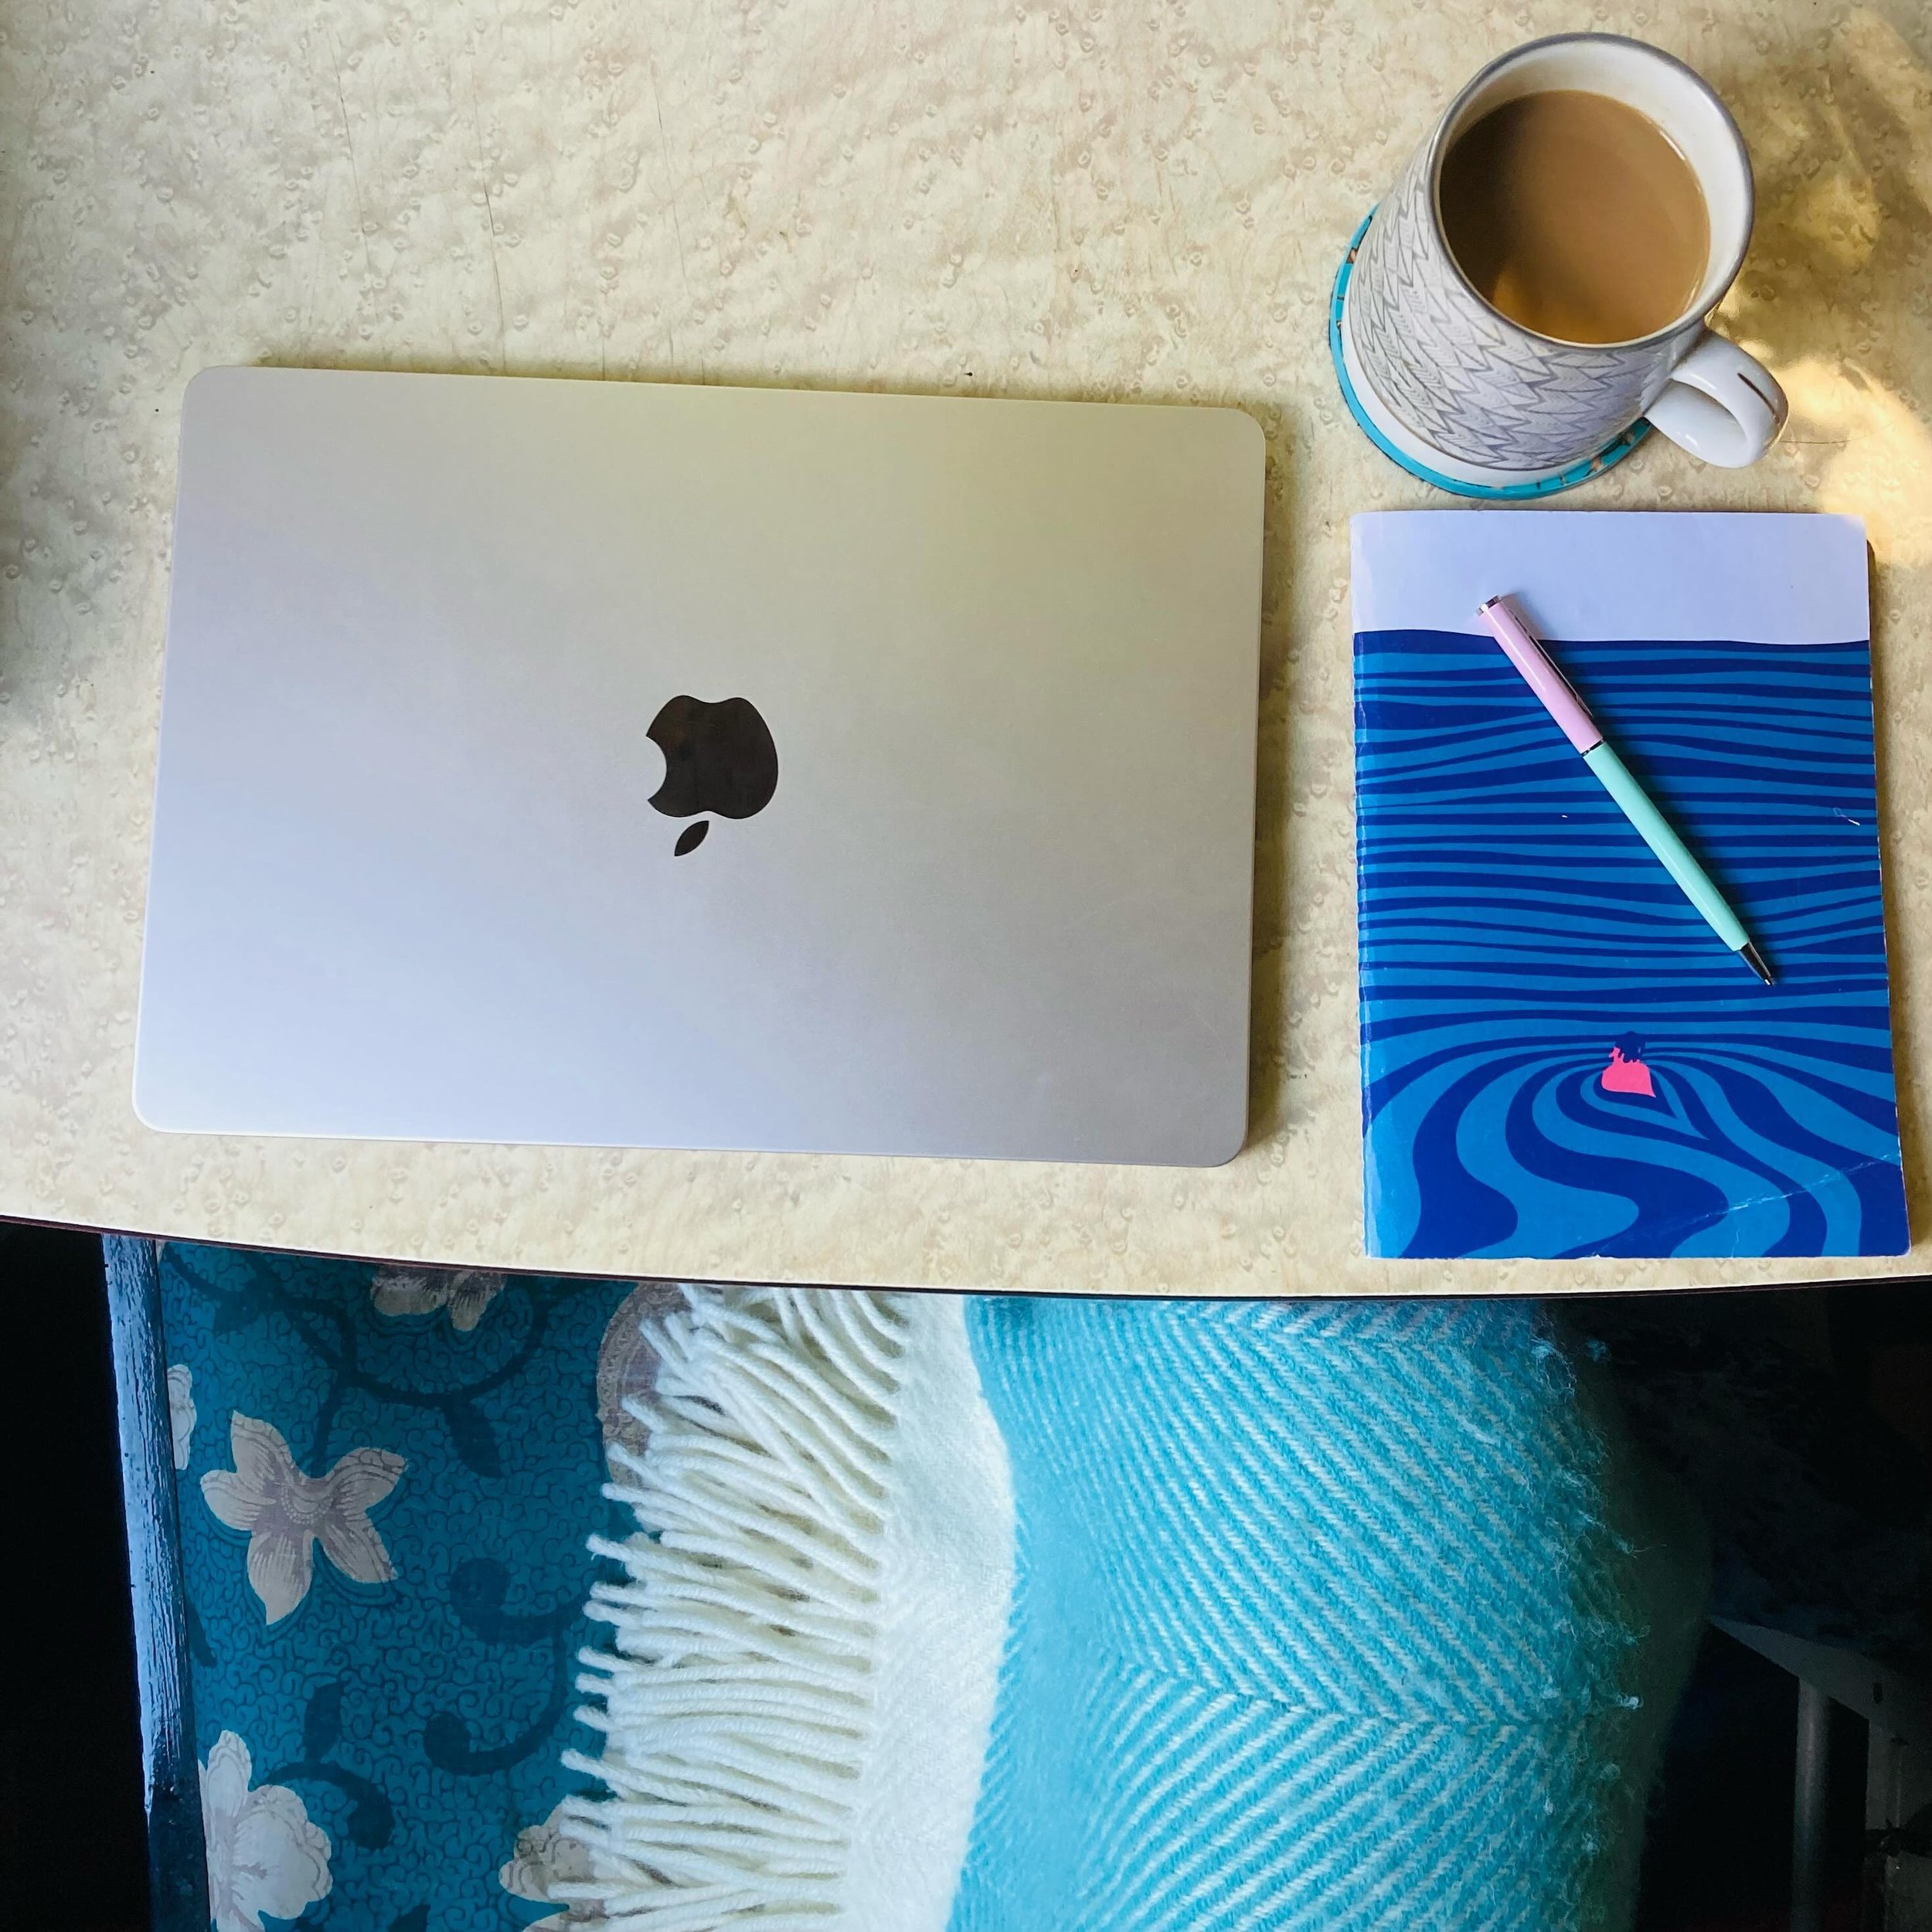 Monday morning writing rig ✍️☕️ And it&rsquo;s a brisk one in the hut, so the blanket is a must (keeping crime cosy, y&rsquo;all 🤗 🔪) @atlanticblankets 💗

#amwriting #writingprocess #writingcommunity #authorsofinstagram #authorsofig #creativelivin